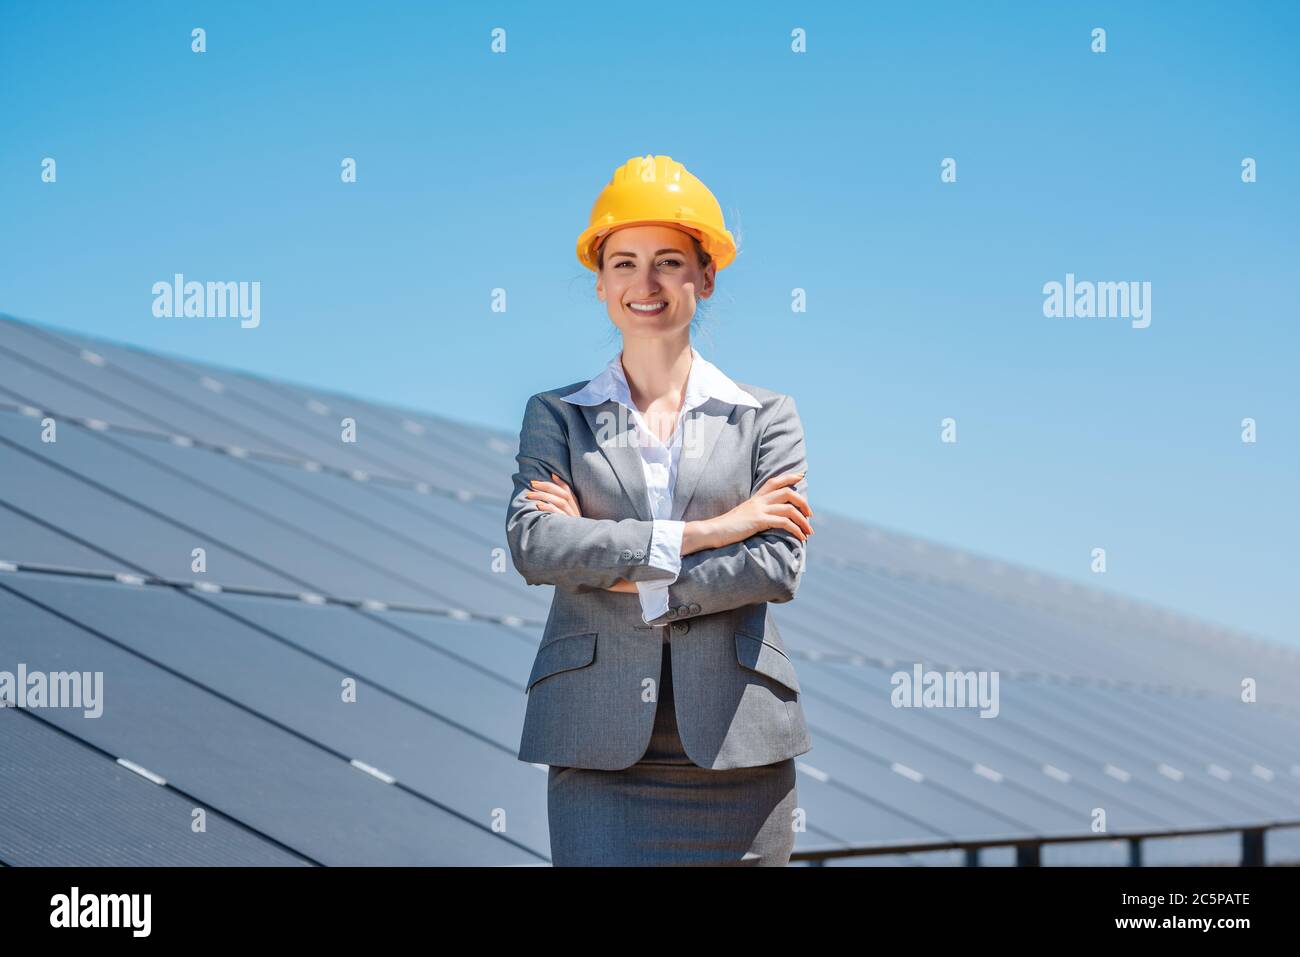 Woman investor in clean energy standing in front of solar panels Stock Photo